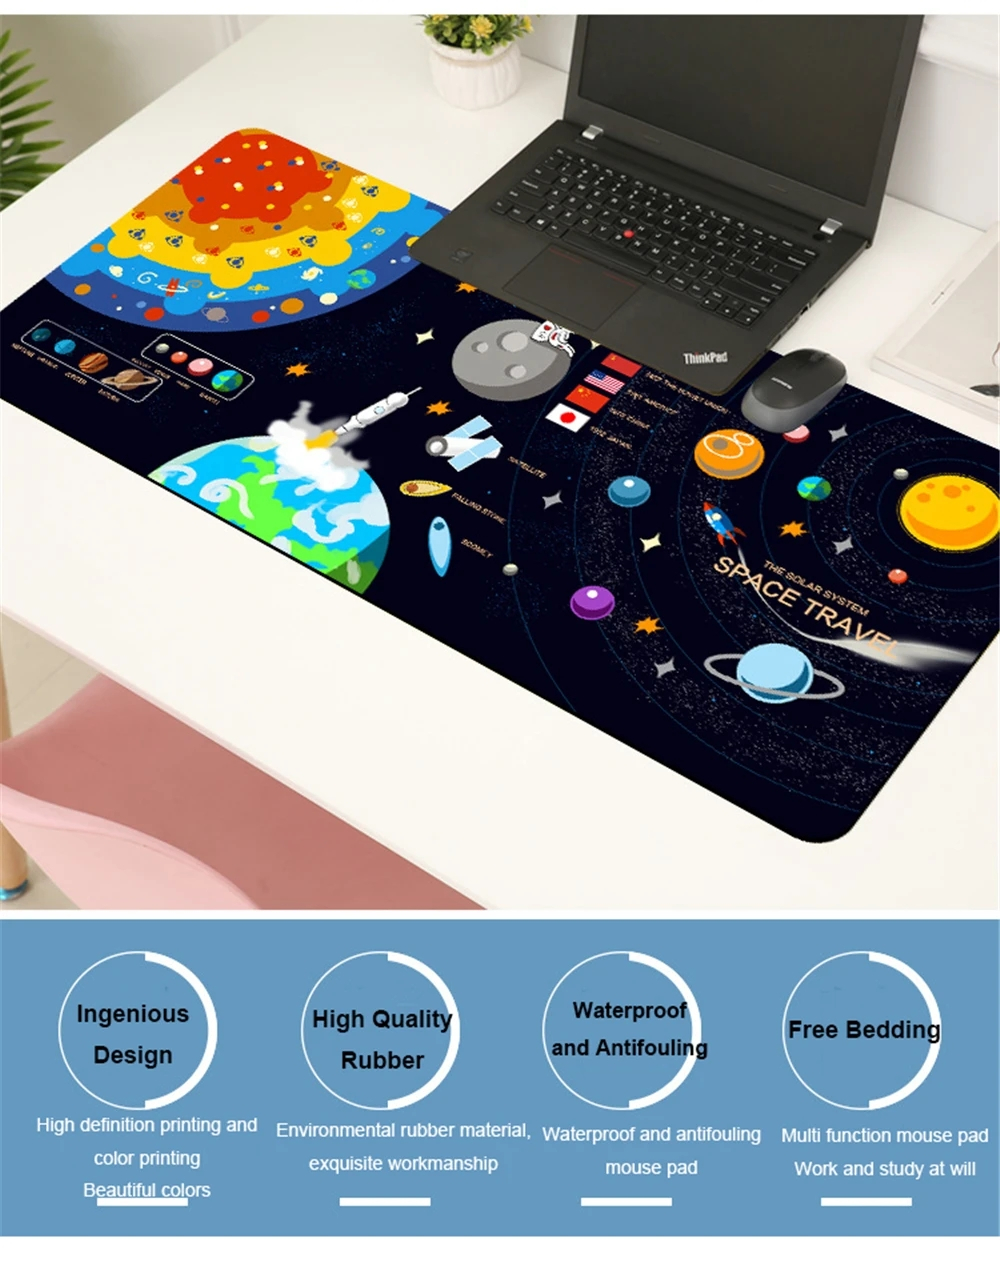 Space-Game-Mouse-Pad-Large-Size-Desktop-Game-Thickened-Locked-Edge-Anti-slip-Rubber-Mouse-Mat-Desk-M-1837053-2